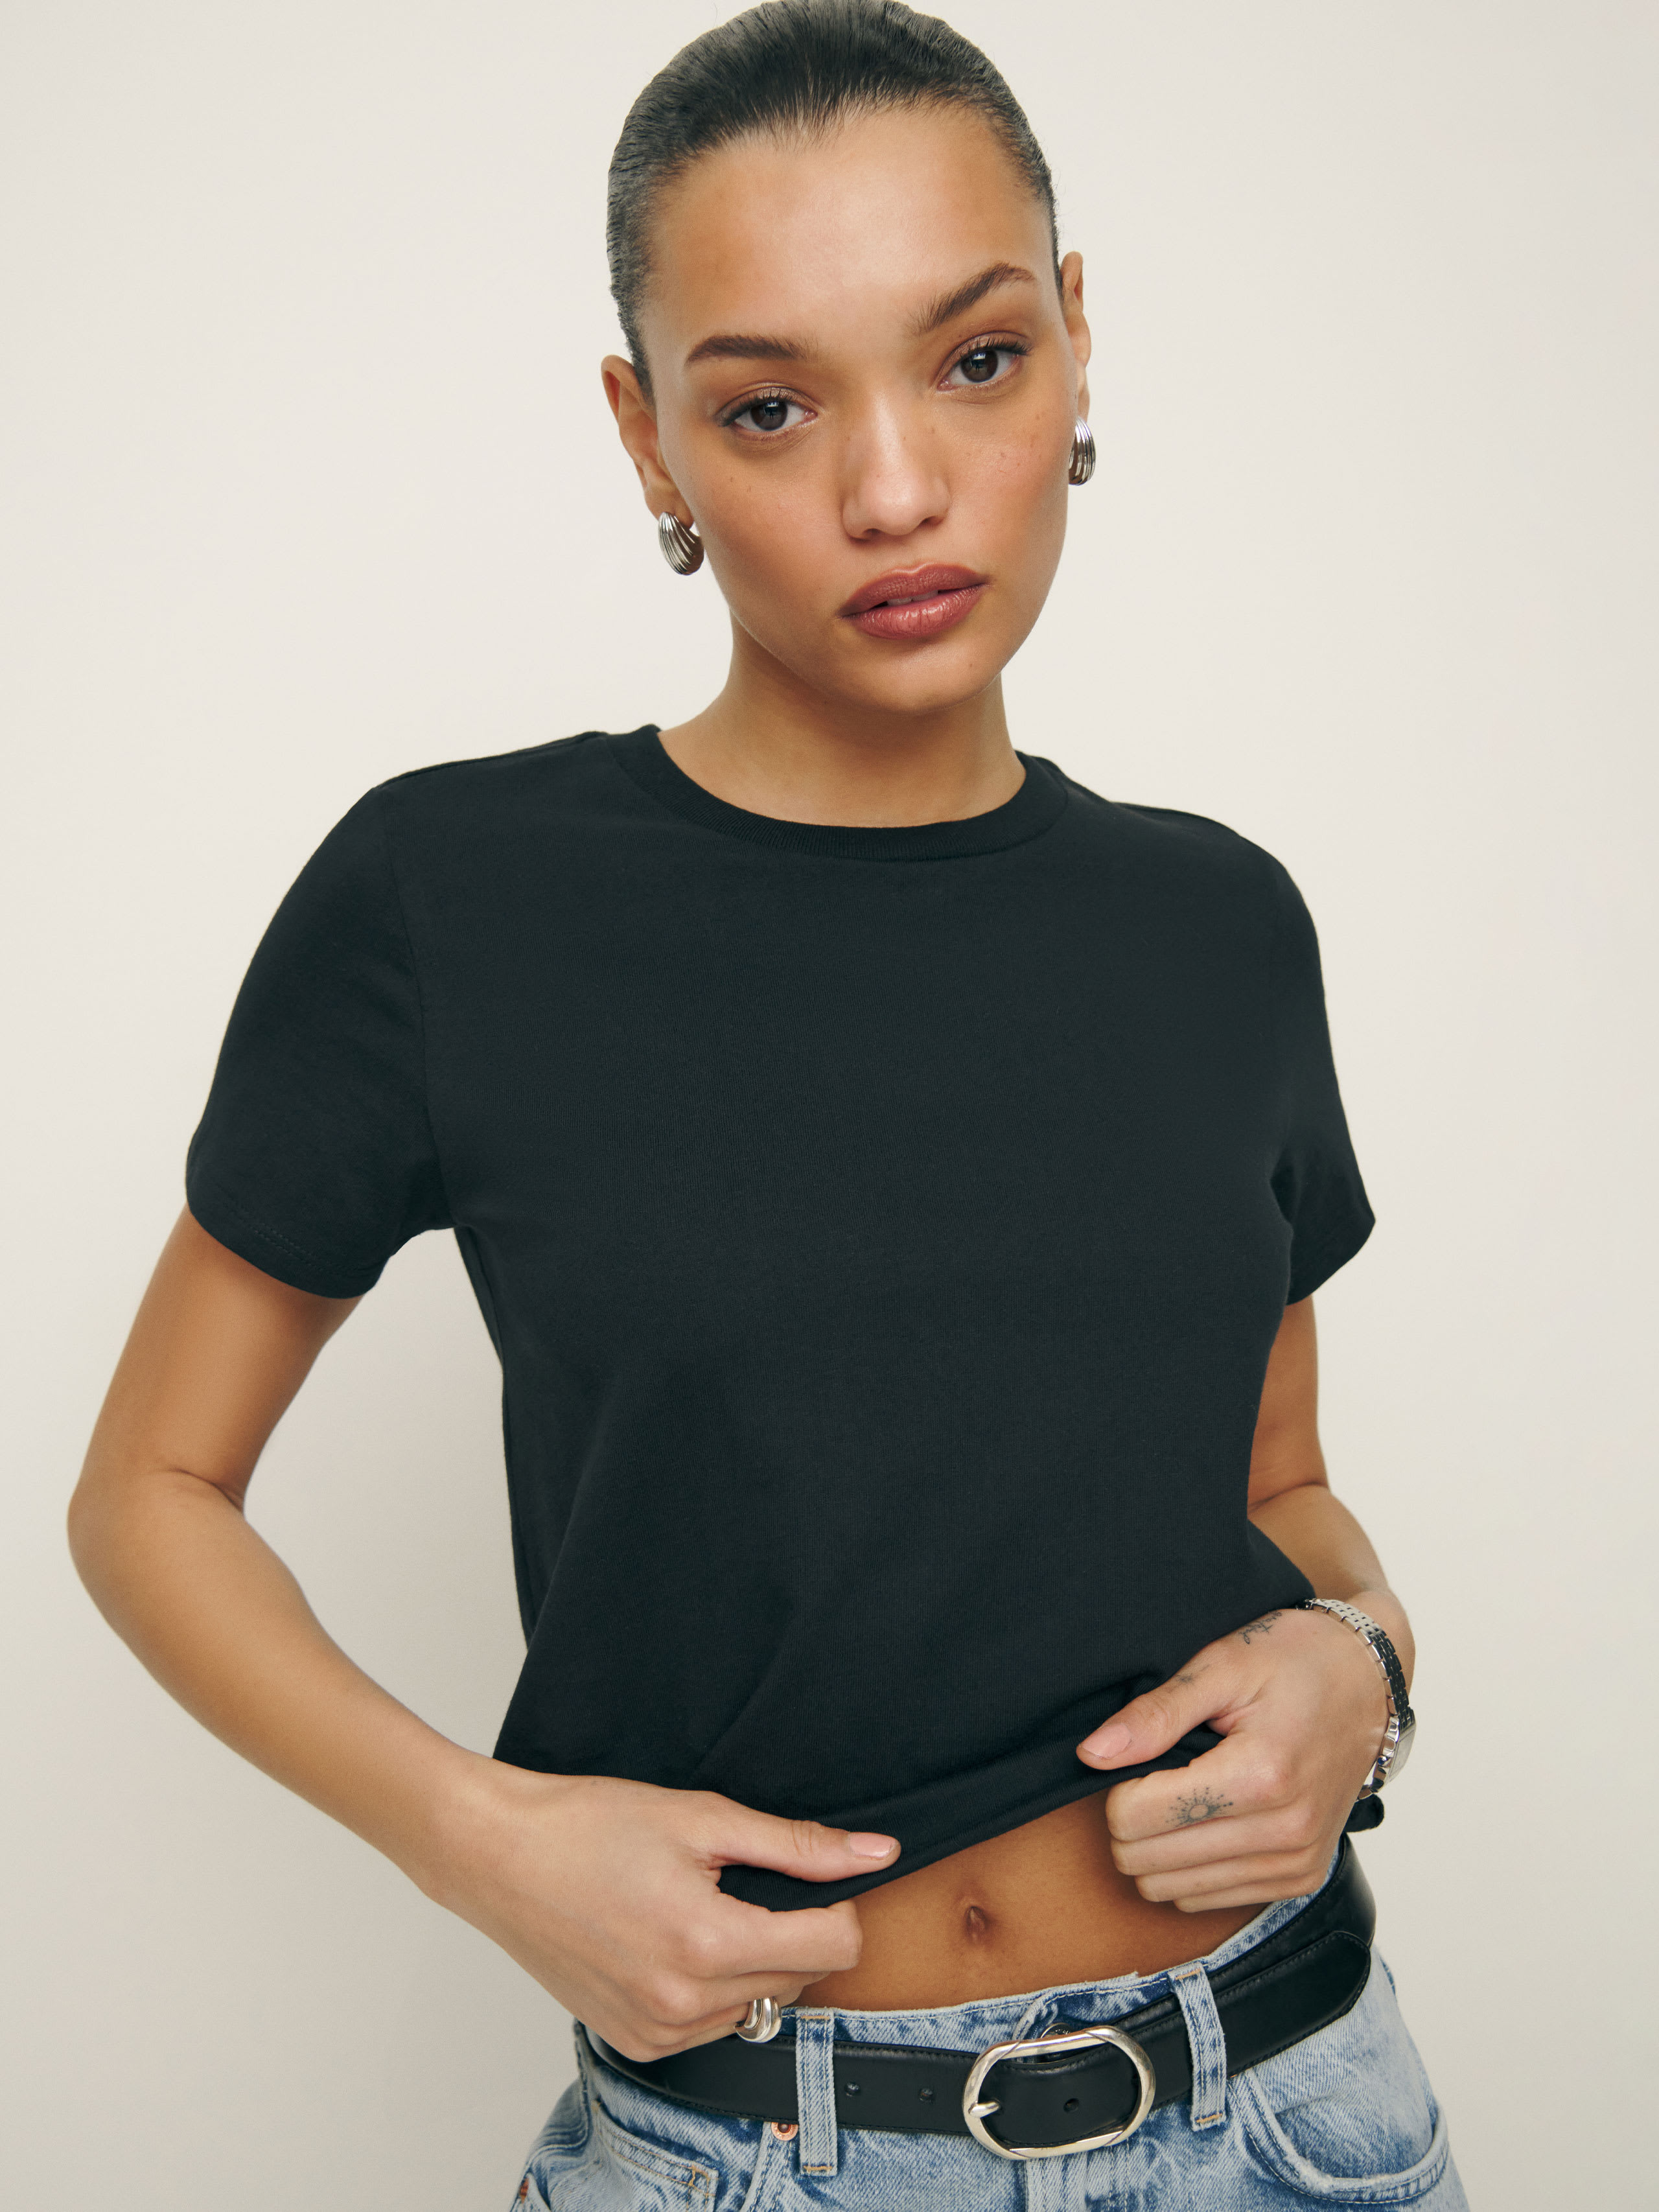 Reformation Classic Crew Tee In Black